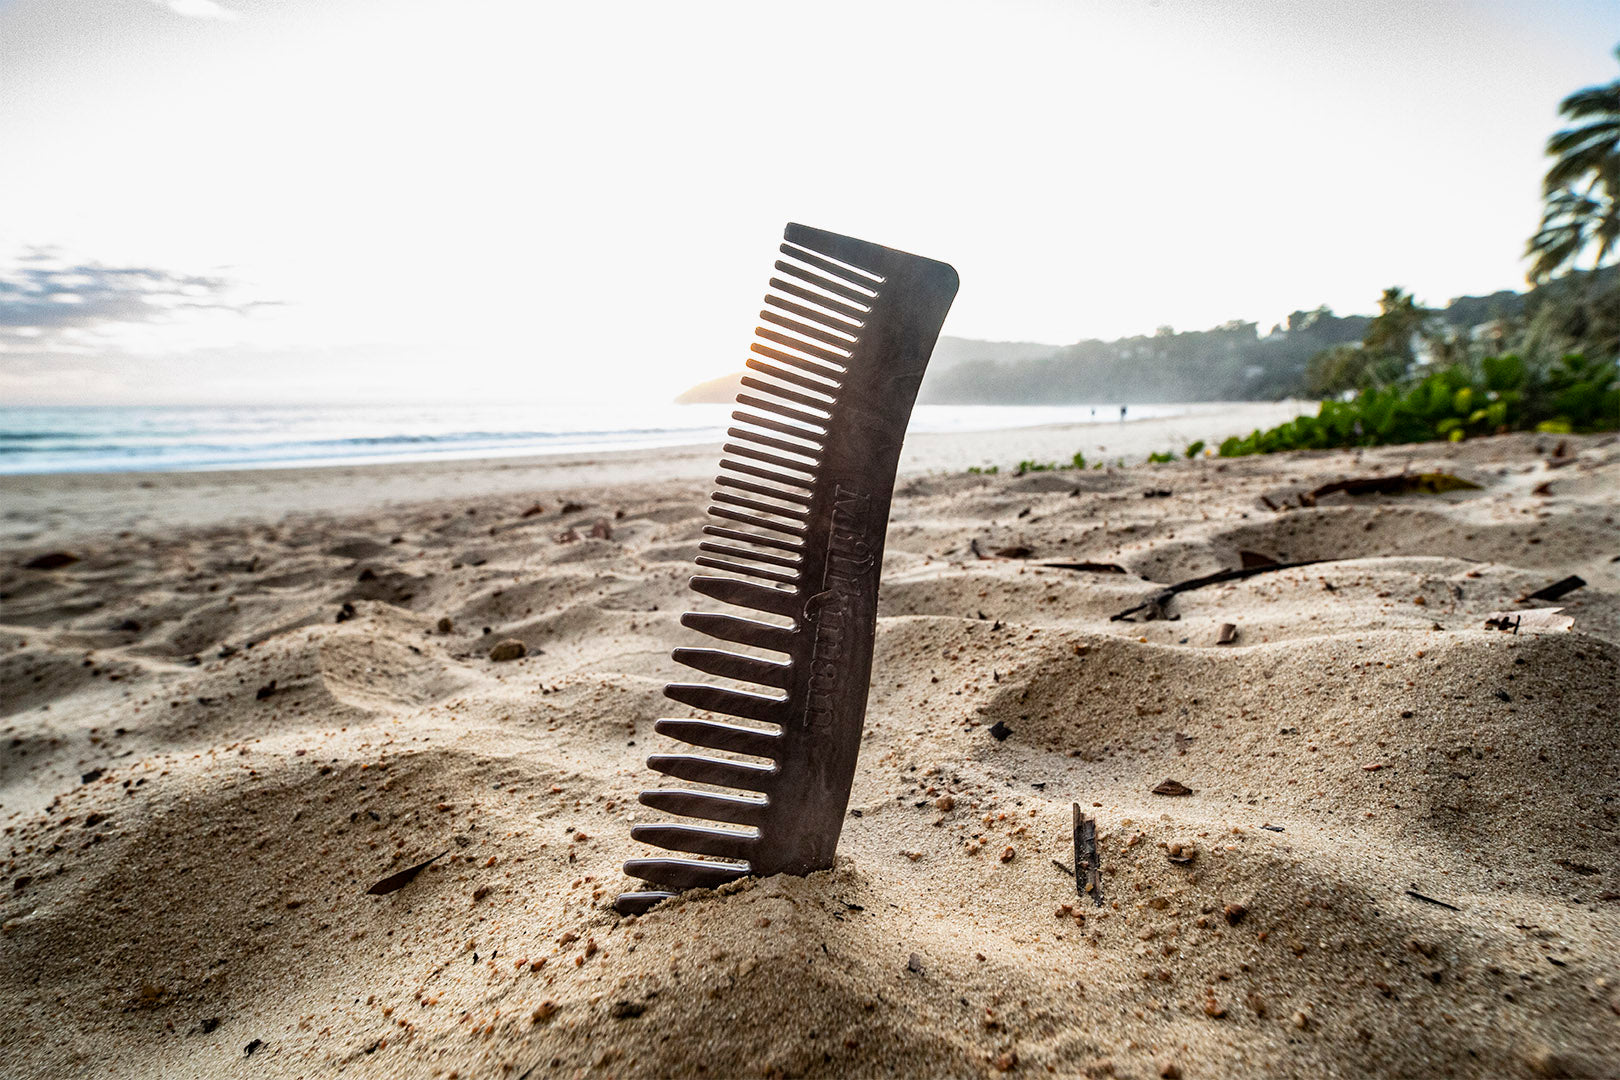 Milkman envirocomb made from recycled plastic bottle caps perched up on the sand at the beard on the sunshine coast queensland